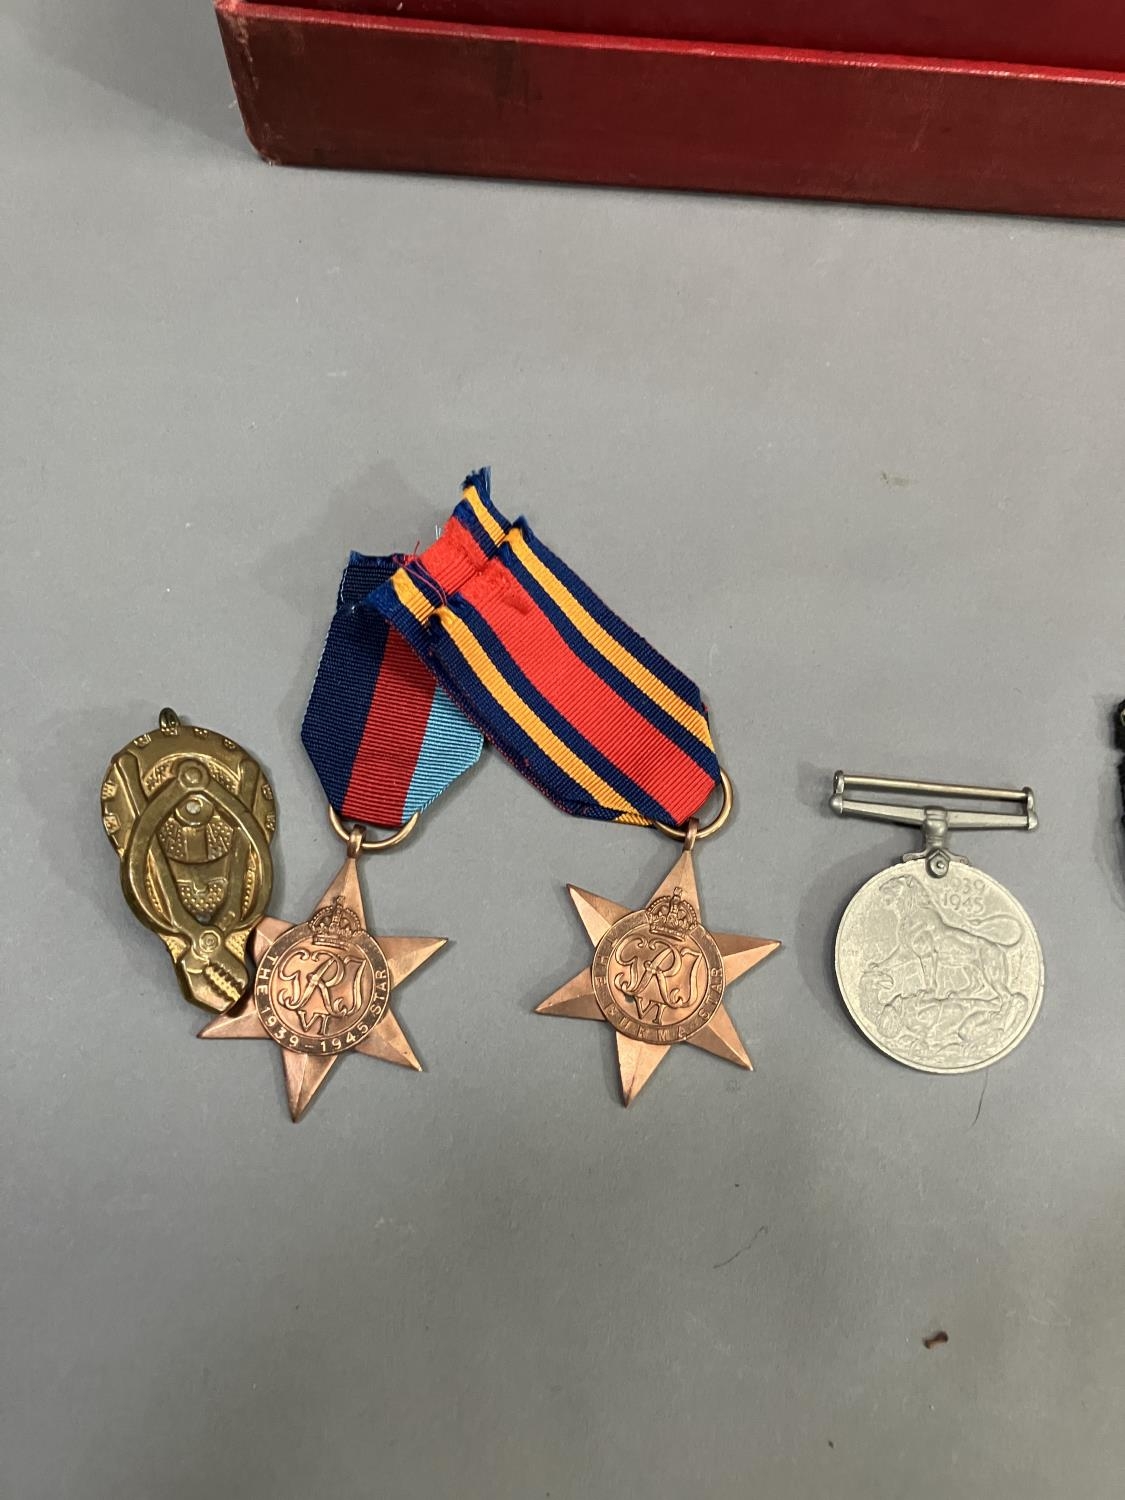 A 1939-1945 Burma Star and a 1939-1945 Defence medal together with a collection of large quantity of - Image 4 of 6